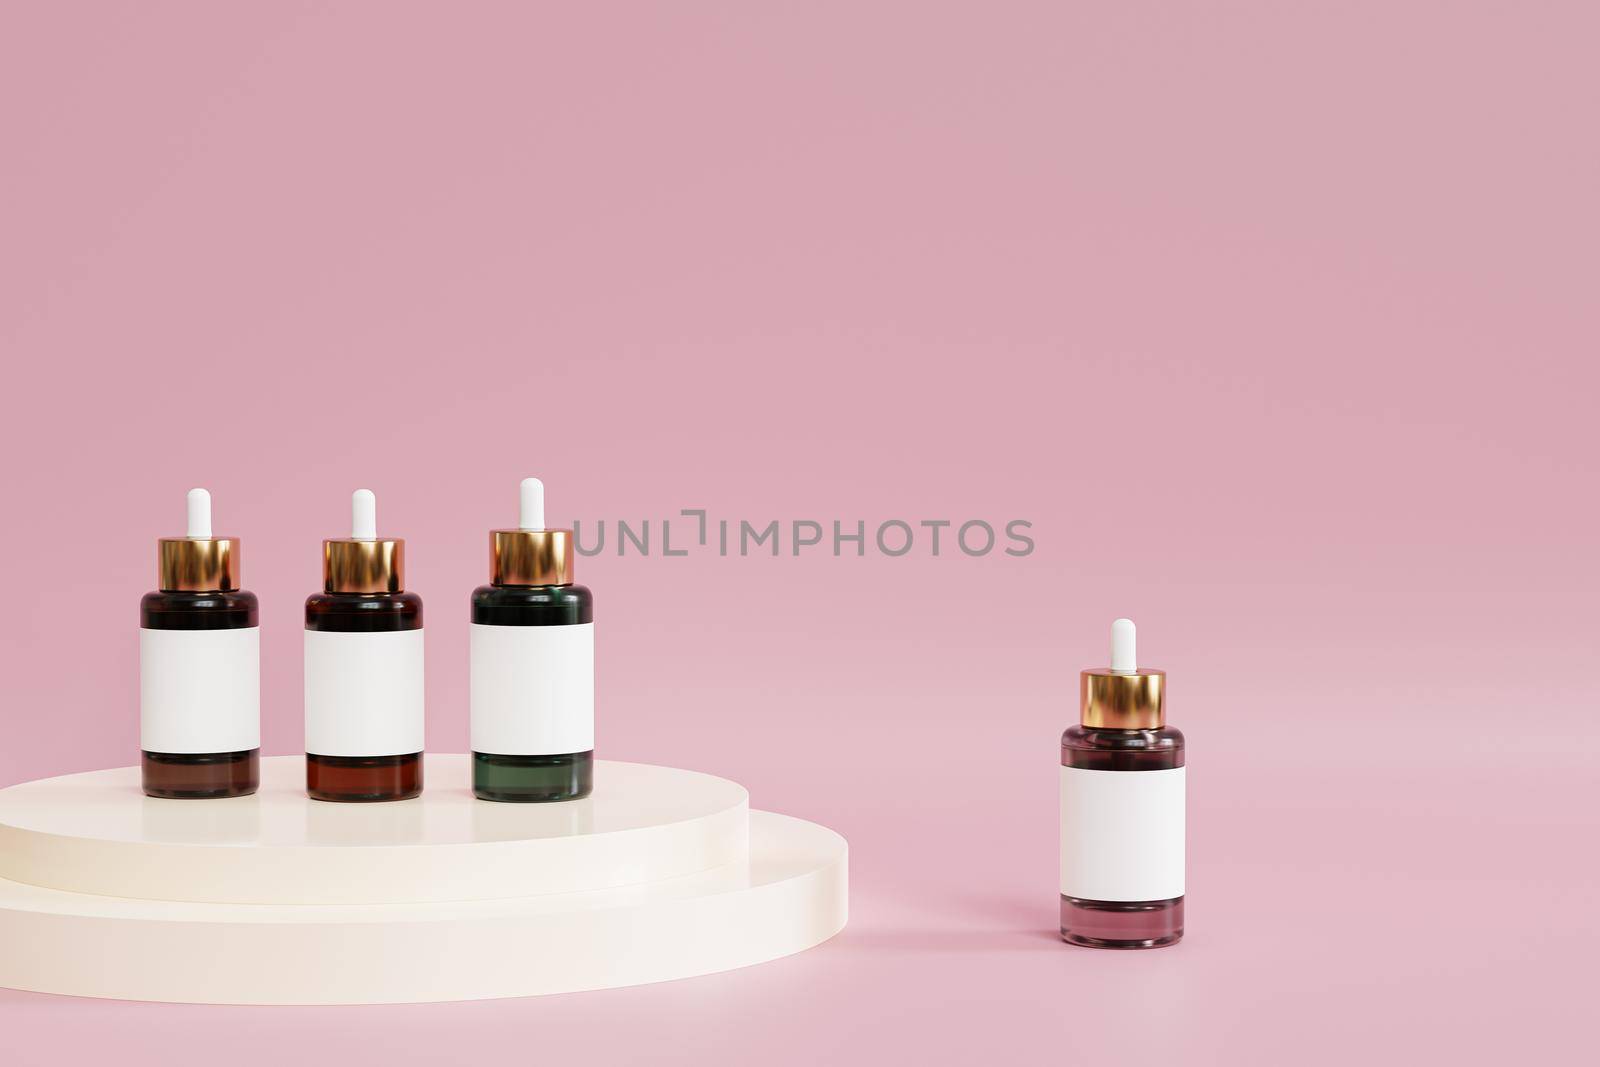 Mockup dropper bottles with label for cosmetics products or advertising on pink background, 3d illustration render